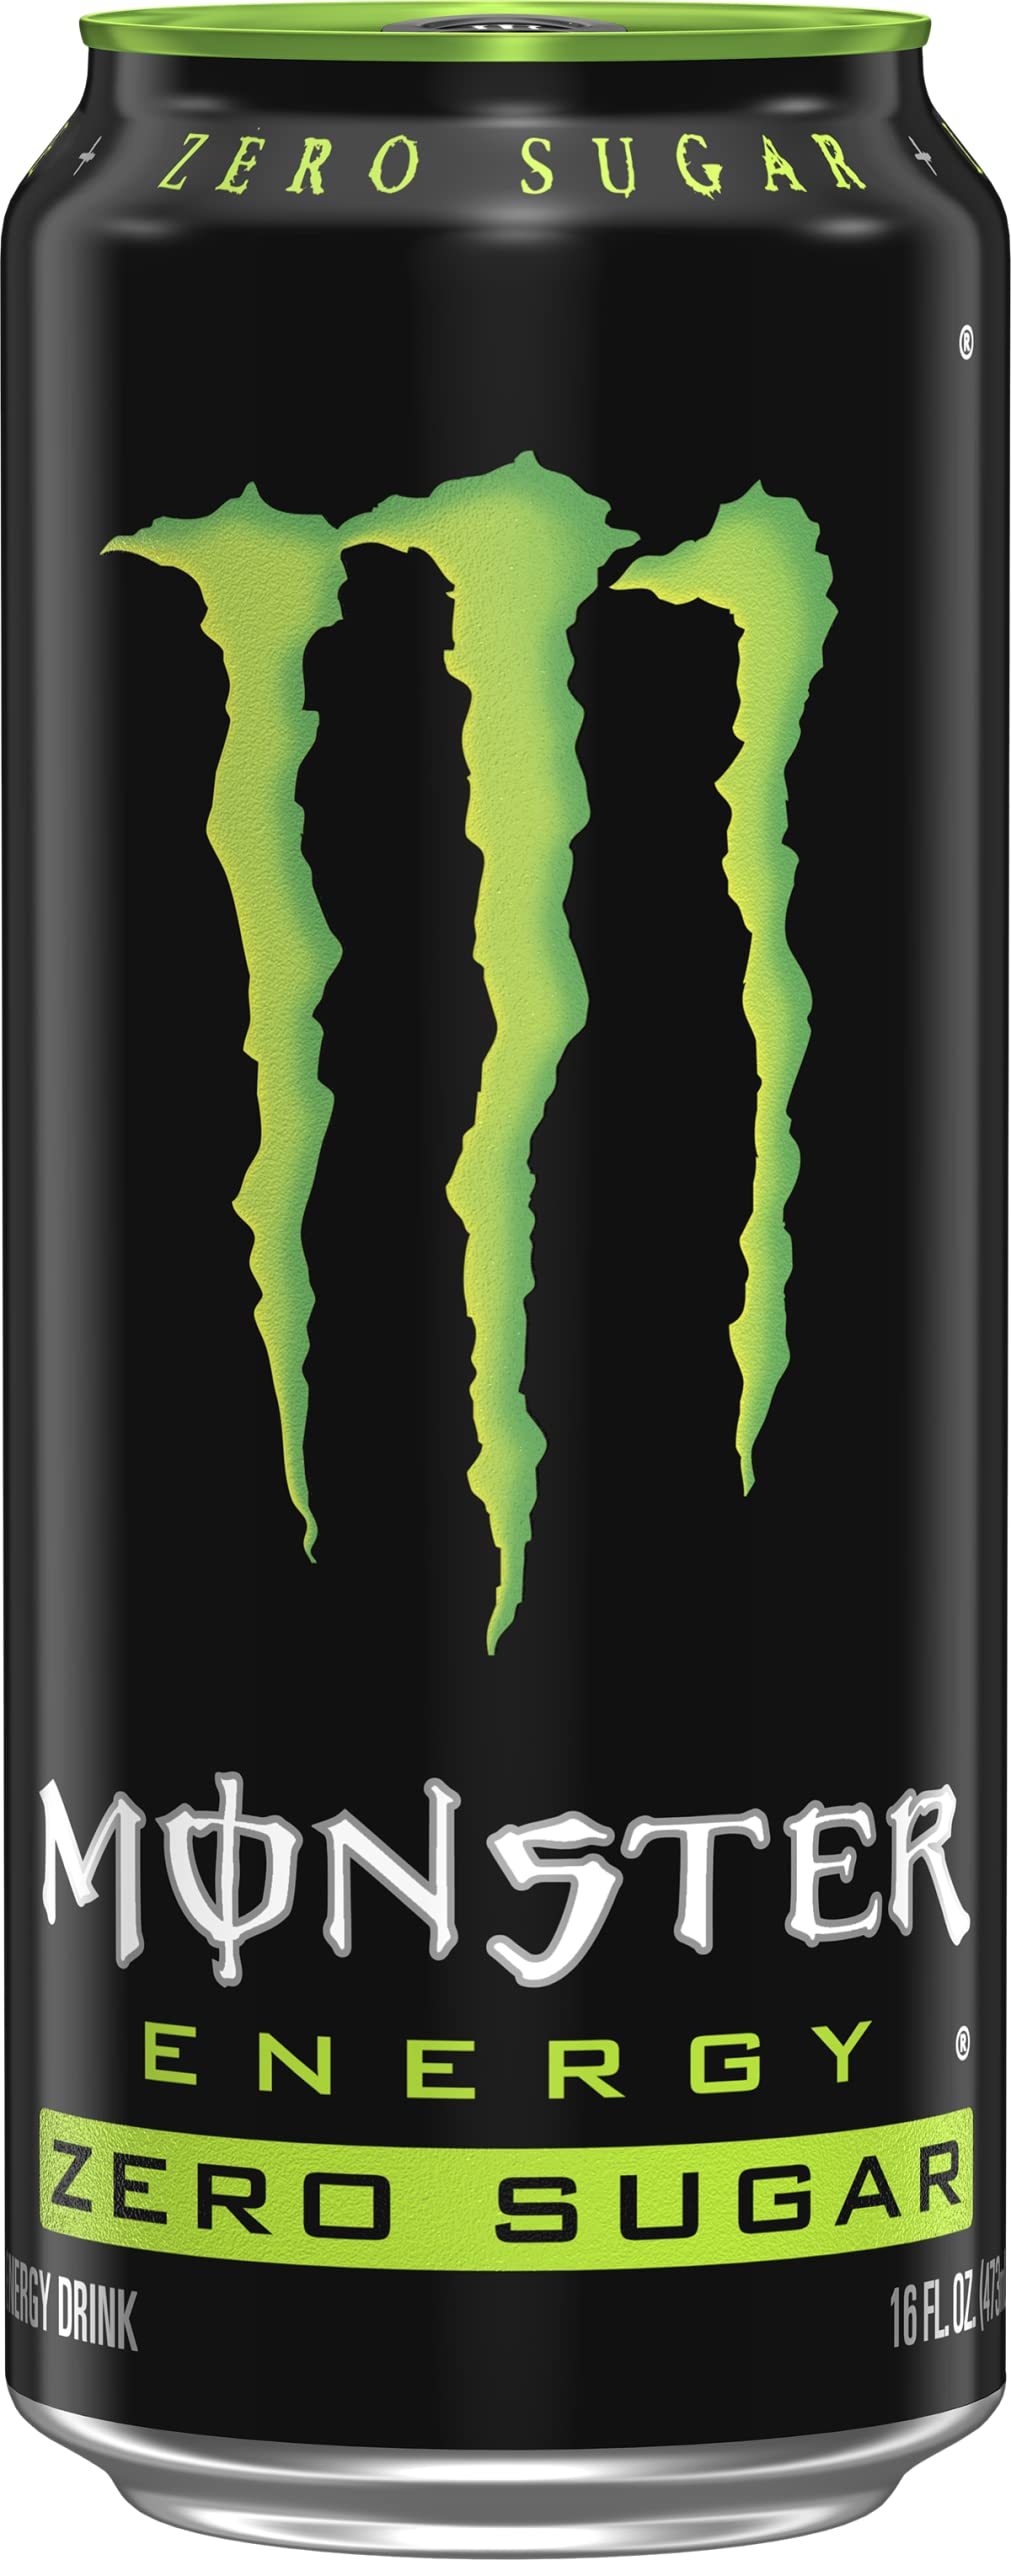 15-Pack 16-Oz Monster Energy Zero Sugar Energy Drink (Green) $17.50 w/ S&S + Free Shipping w/ Prime or $35+